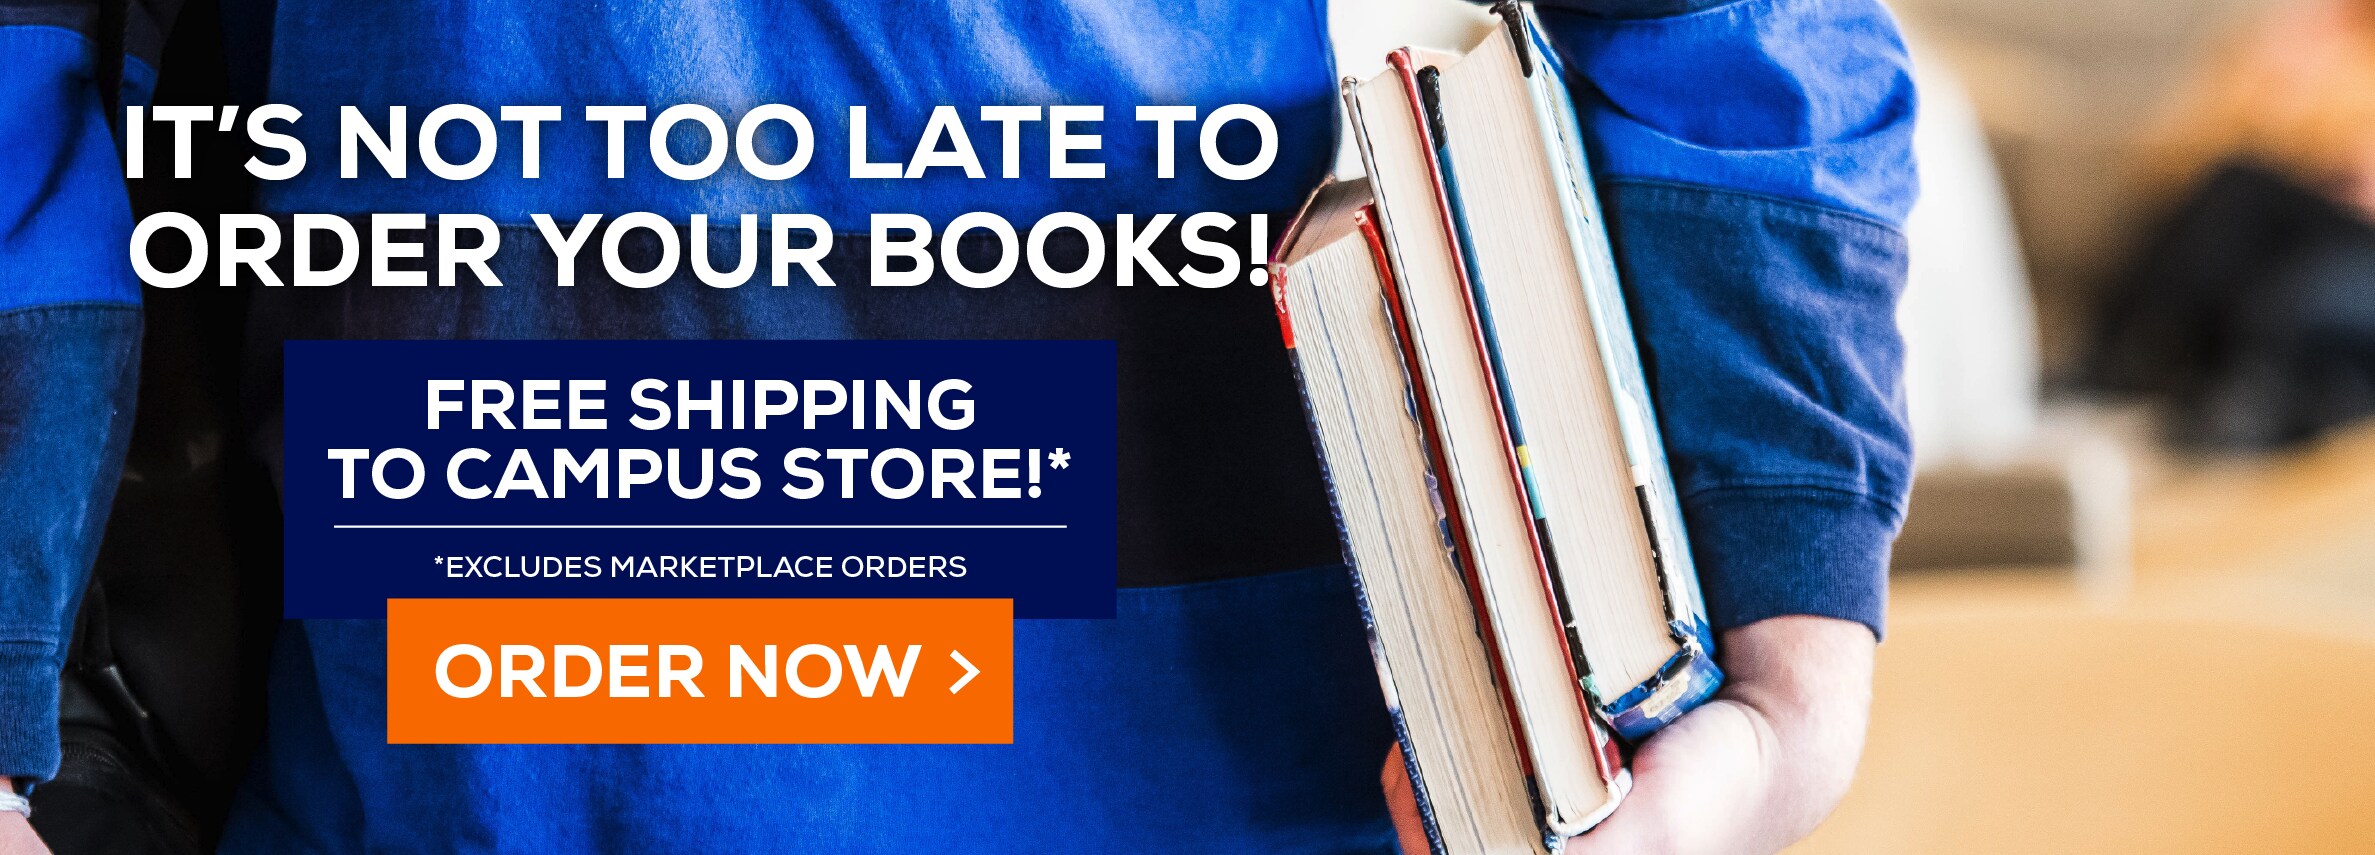 ItÃ¢â‚¬â„¢s not too late to order your books! Free shipping to campus store!* Excludes marketplace purchases. Order Now.